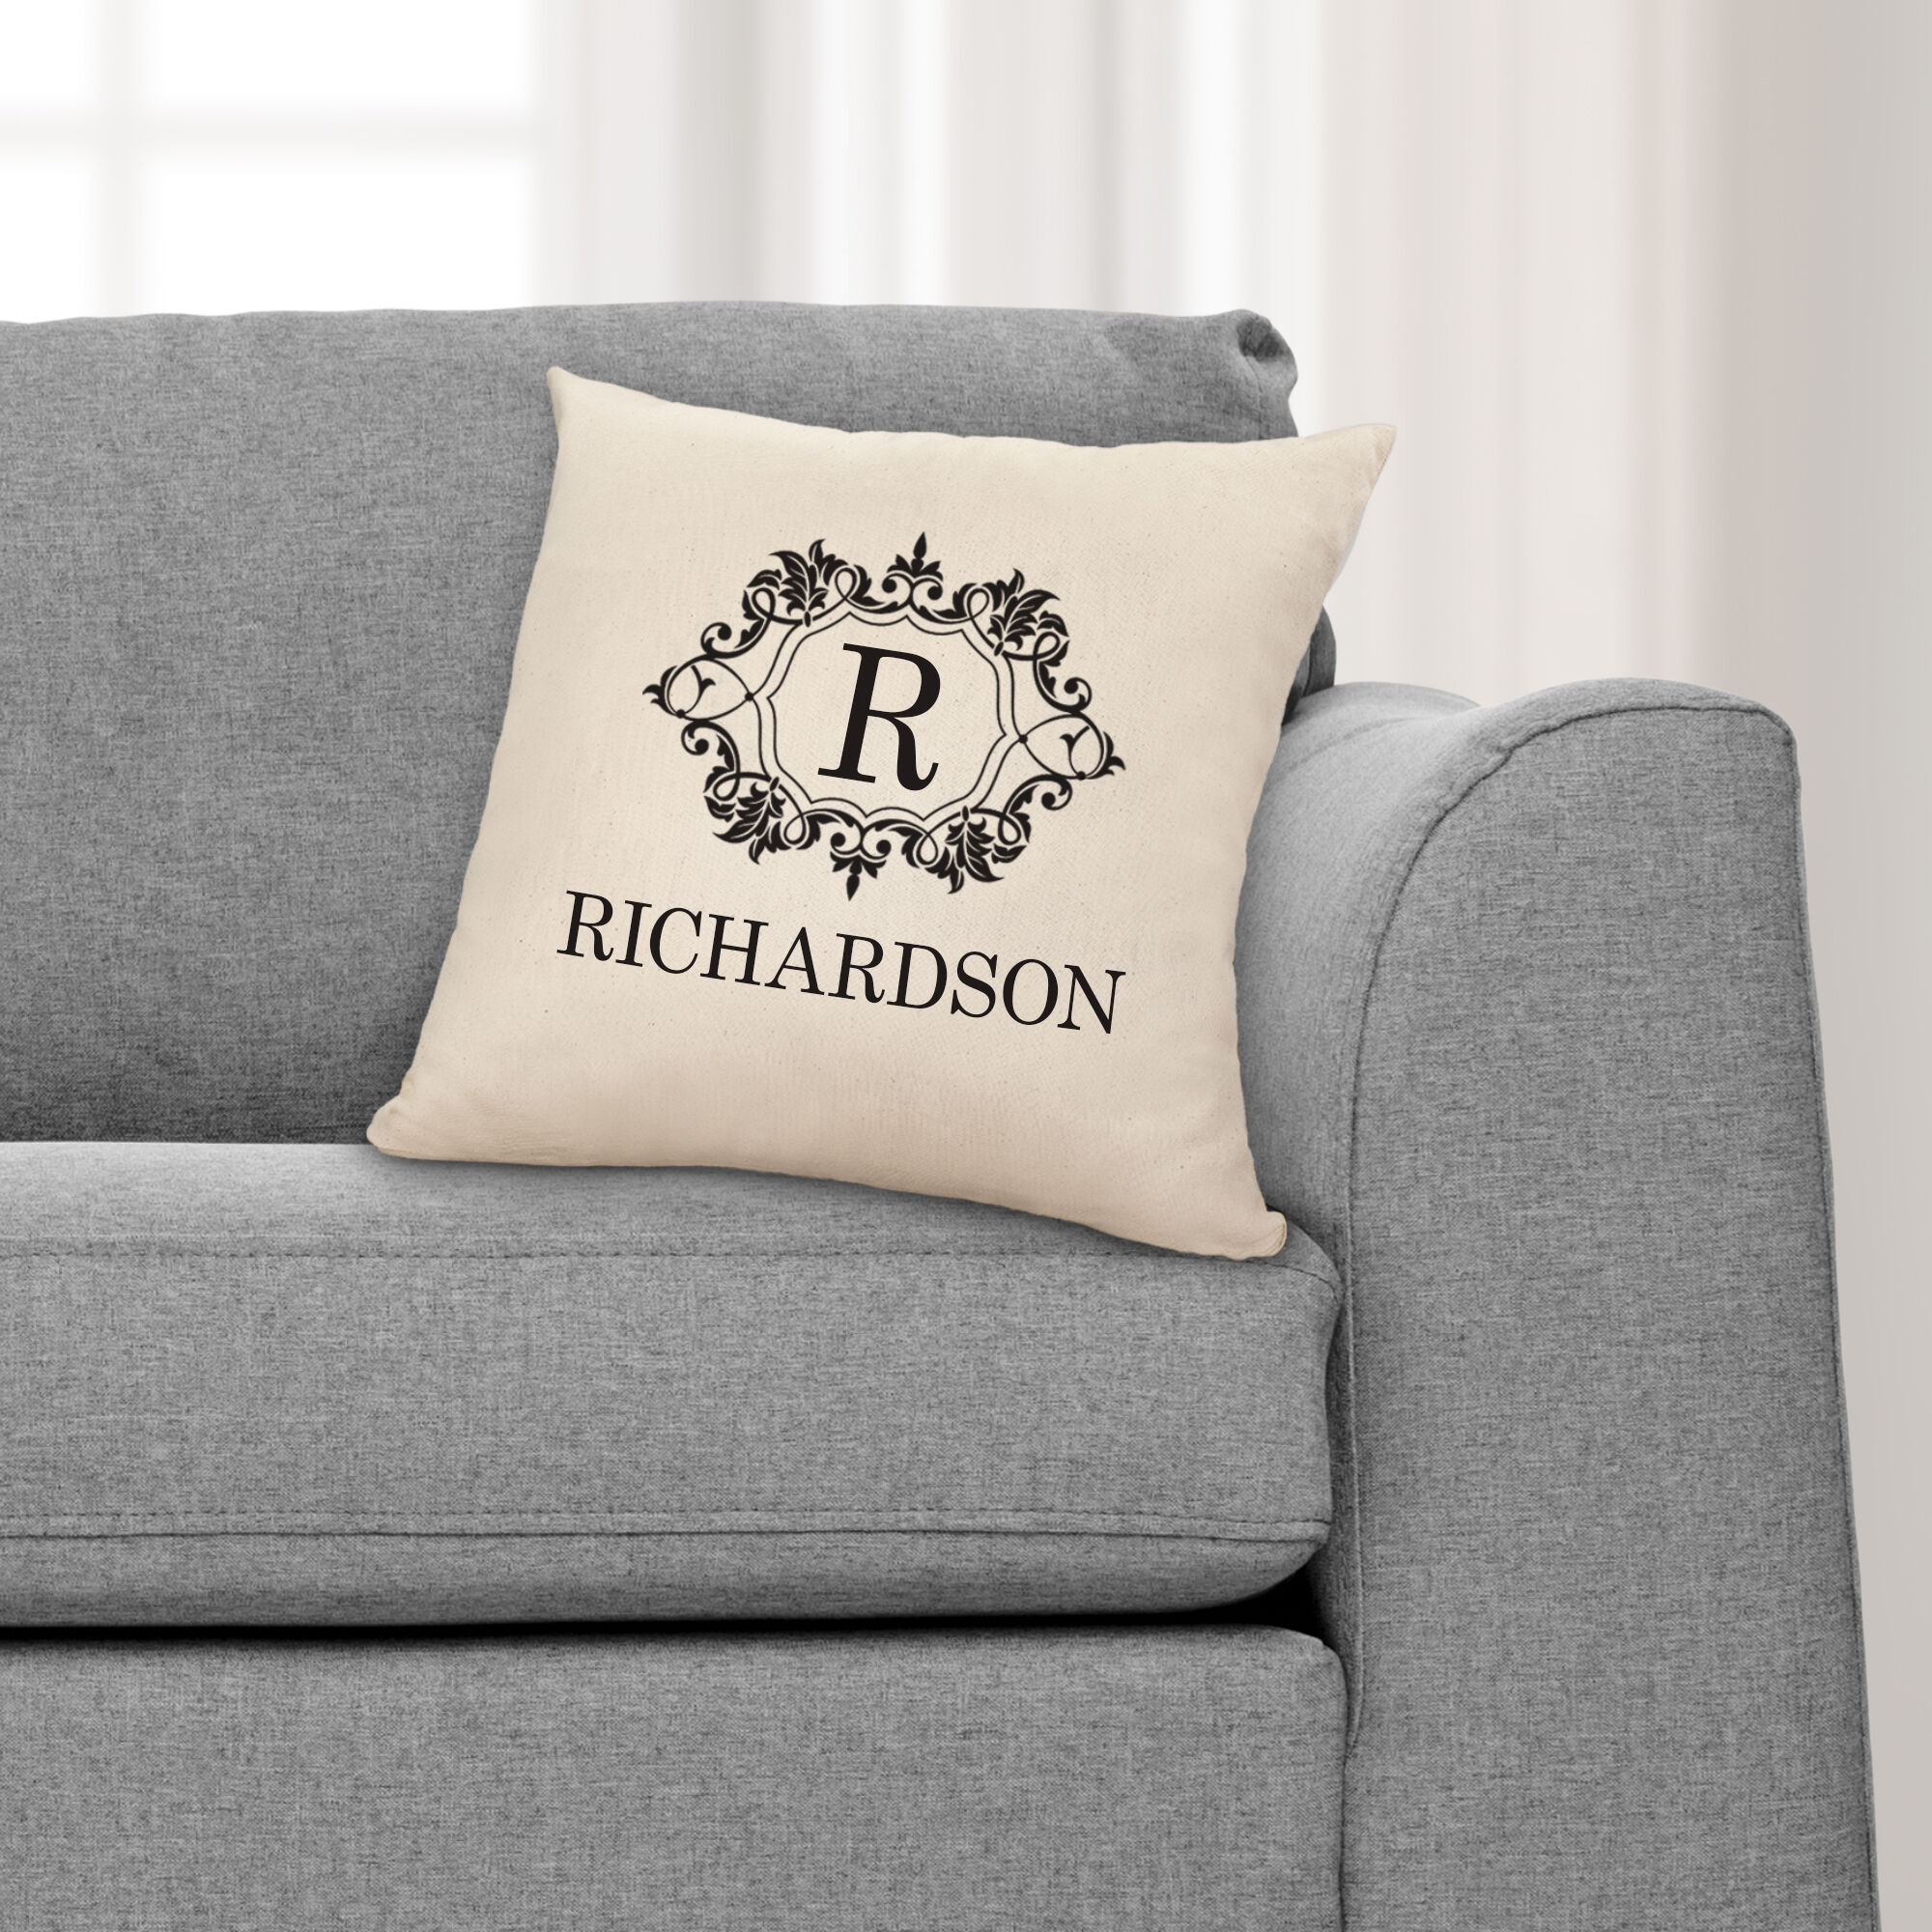 The Personalized Throw Pillow 10920 0014 m room